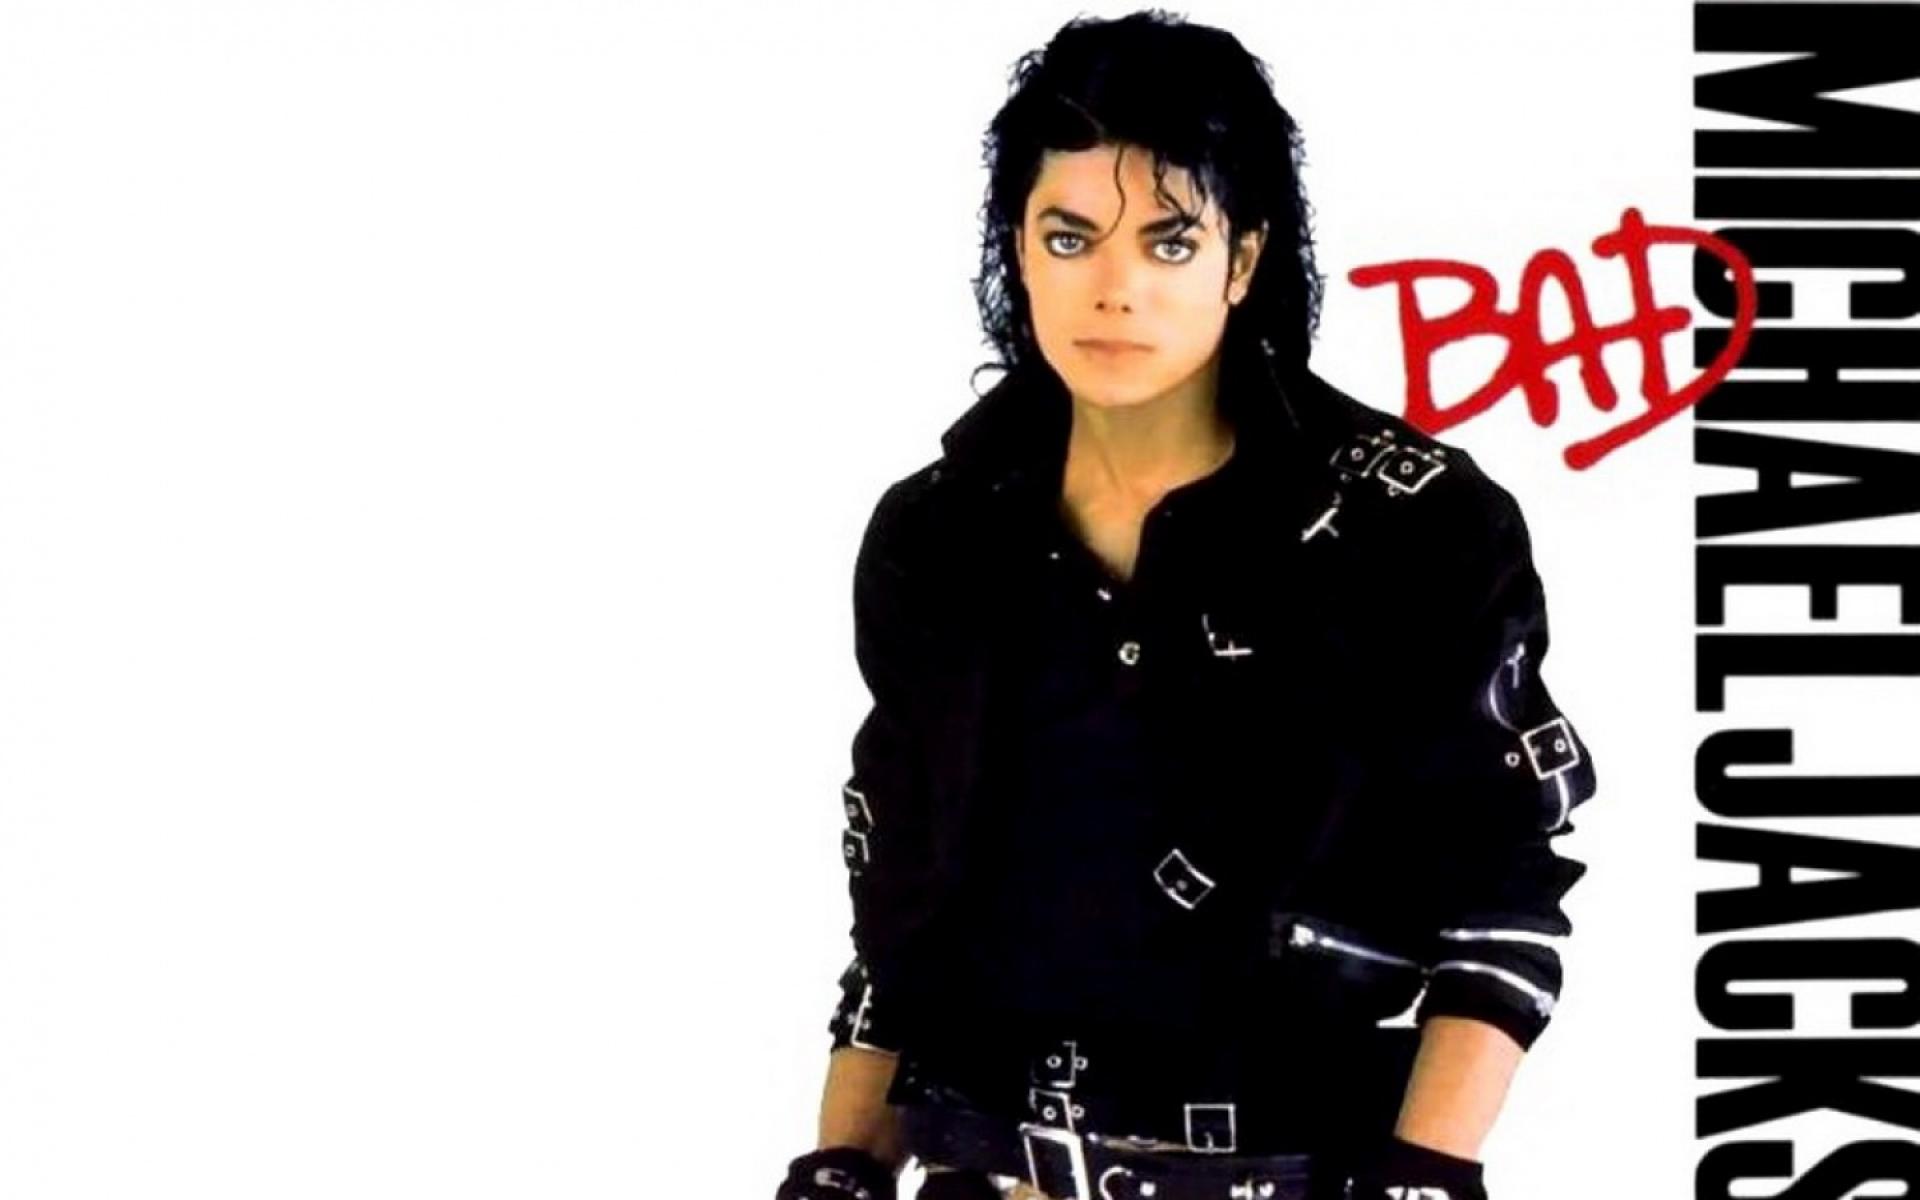 michael jackson images wallpapers #5